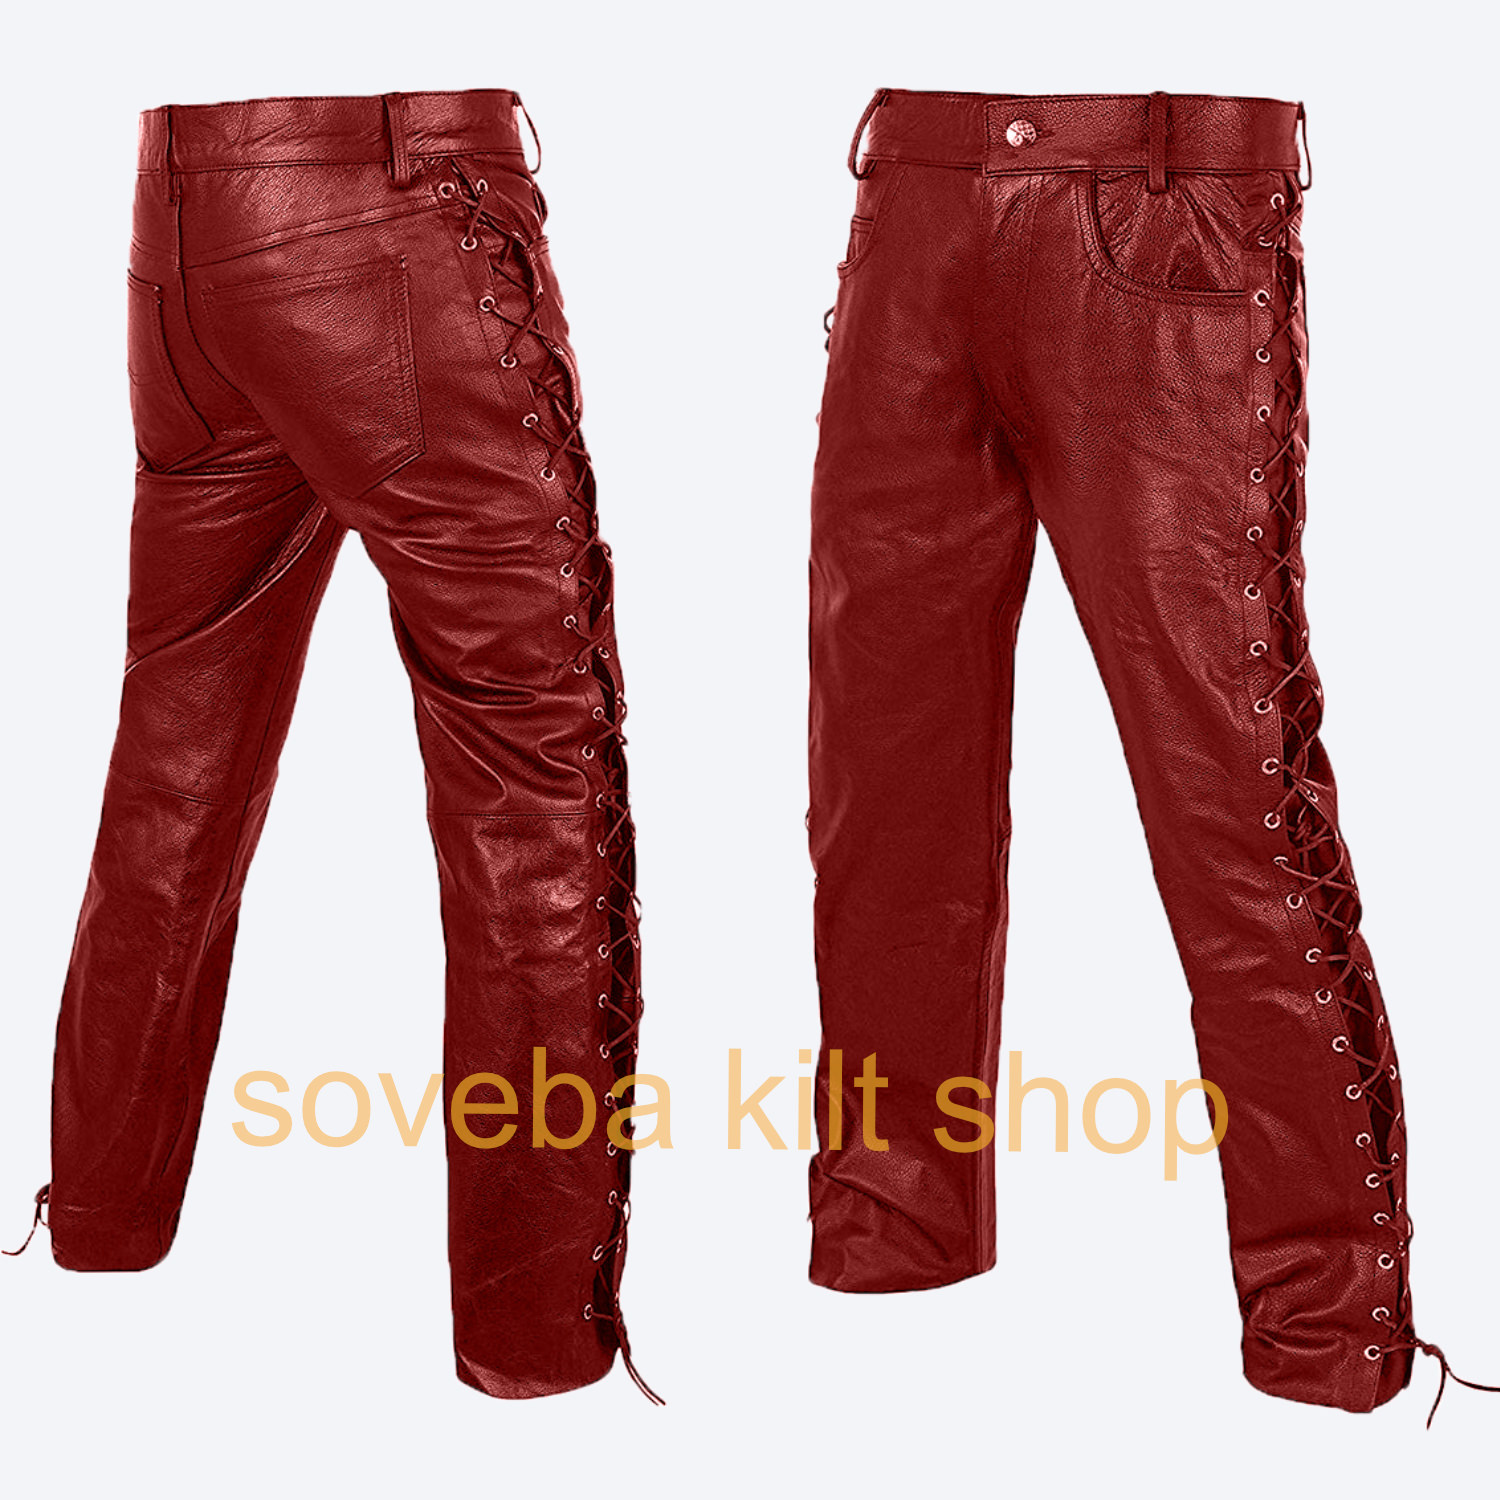 Red Leather Lace Up Sides Pant For Men - Mens